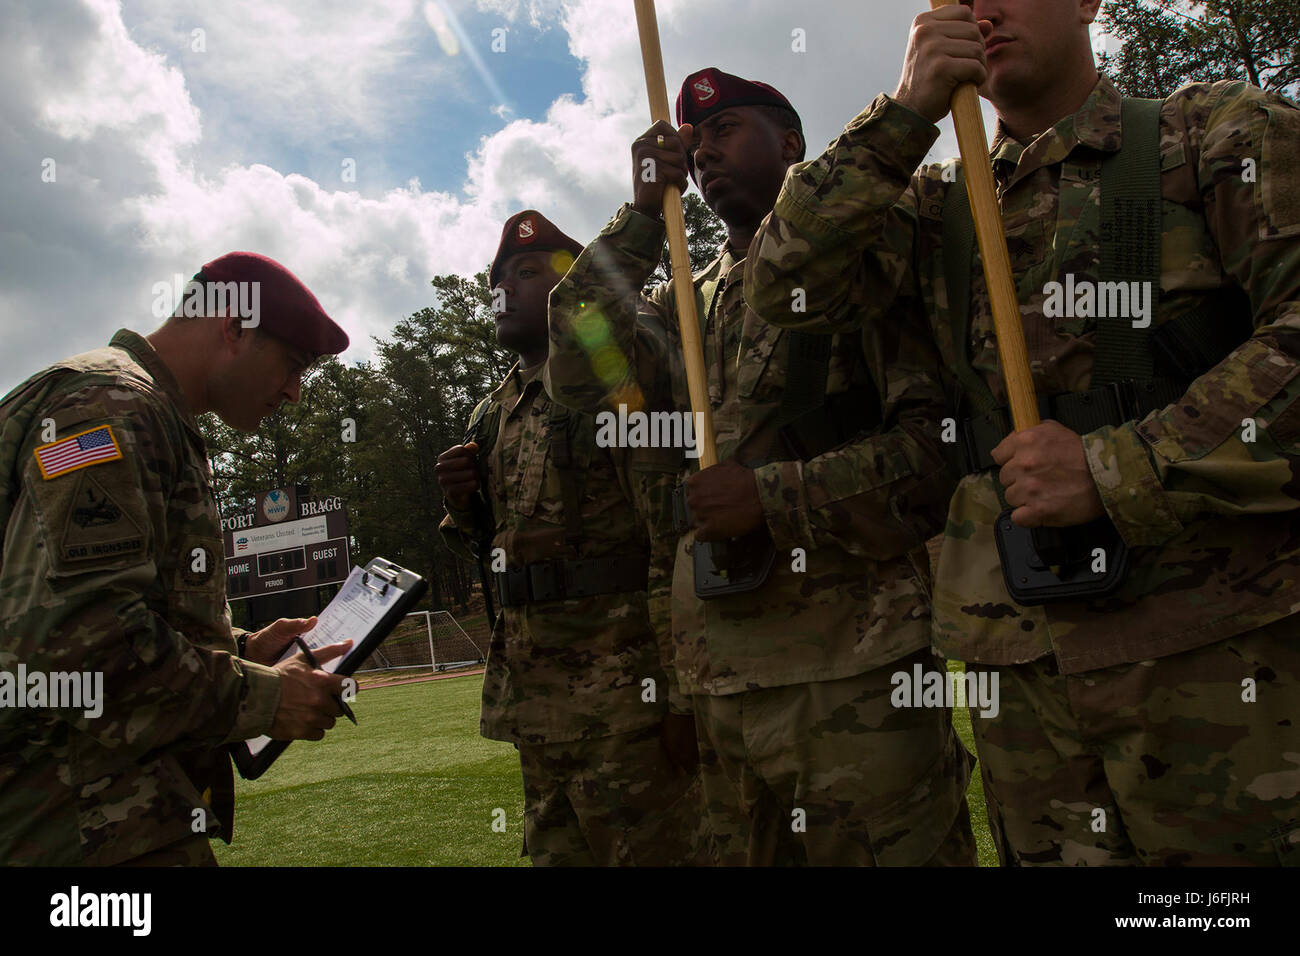 Paratroopers of the Headquarters and Headquarters Battery, 82nd Division Artillery, 82nd Airborne Division stand in formation for a Task-Color Guard inspection during day one of the Color Guard and Guidon Competition at Towle Stadium on Fort Bragg, N.C., May 18, 2017. The Division's legacy as 'America's Guard of Honor' is traced back to the American color guard in Berlin after World War II. In honor of the proud history of the 82nd, we continue to carry on the tradition of Paratroopers past and present. (U.S. Army photo by Spc. L'Erin Wynn) Stock Photo